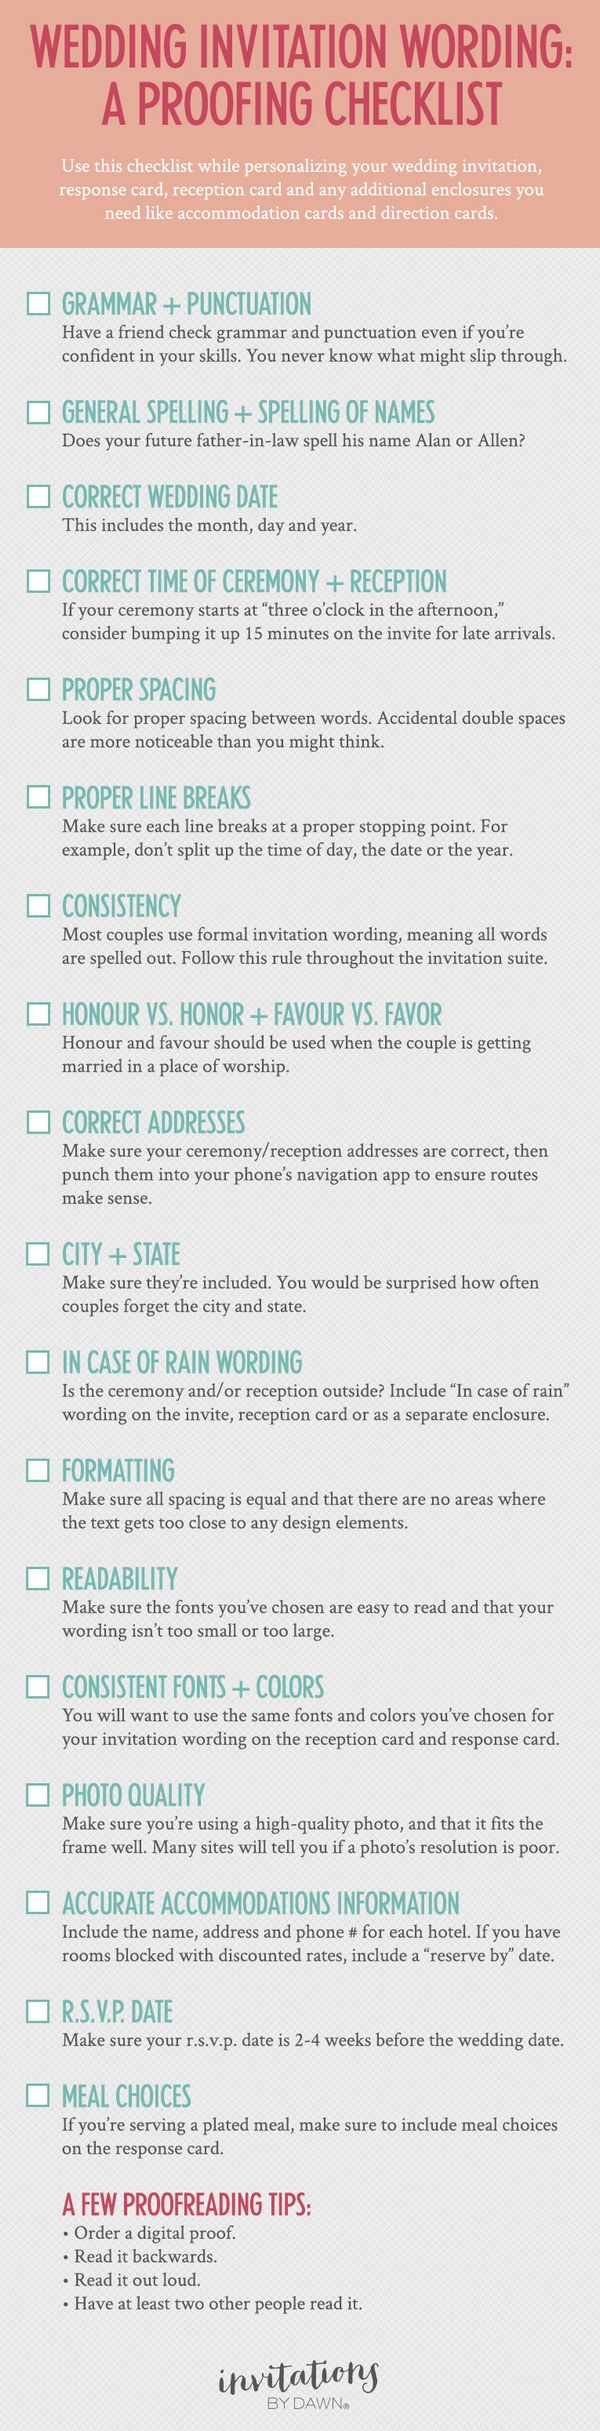 A Proofing Checklist for Wedding Invitations